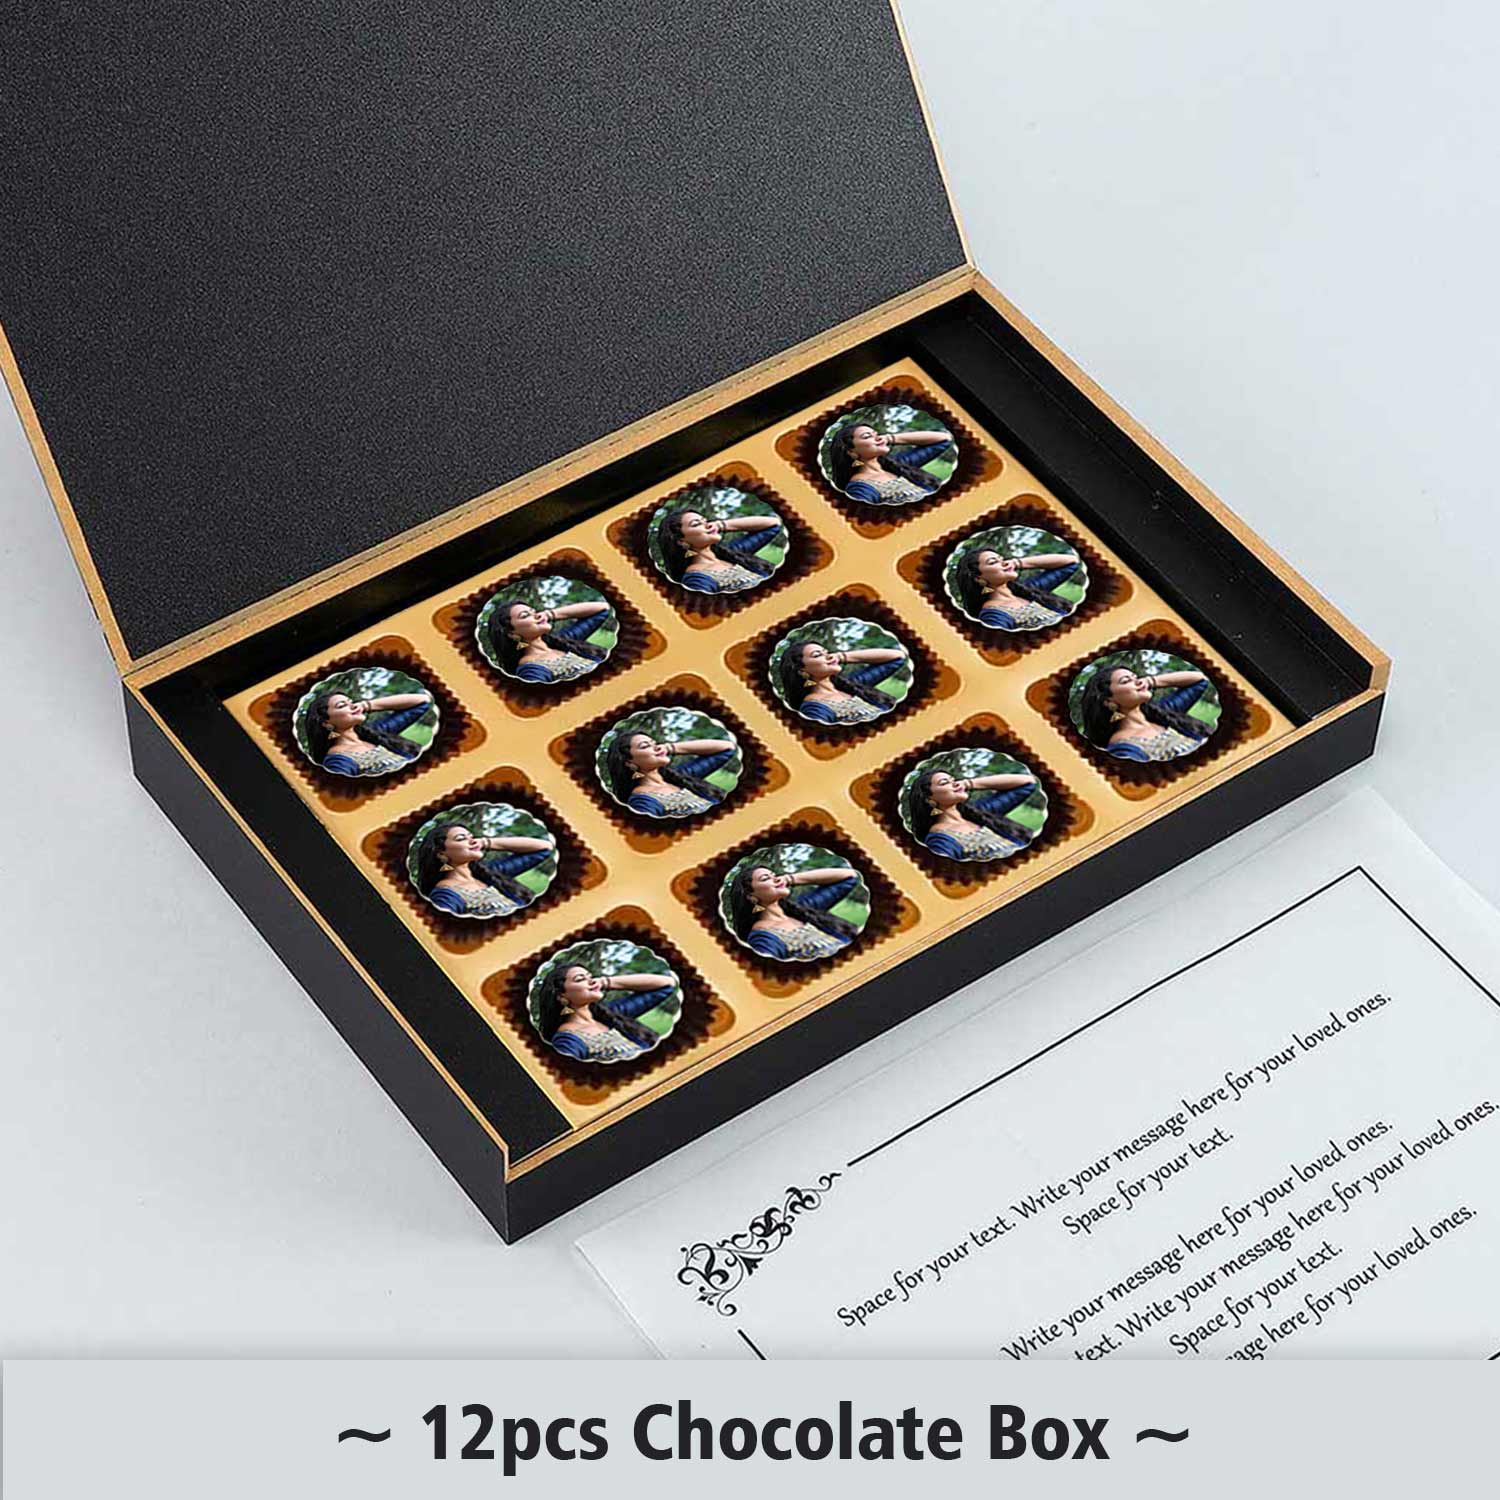 Customised box of chocolates with beautiful design printed on it